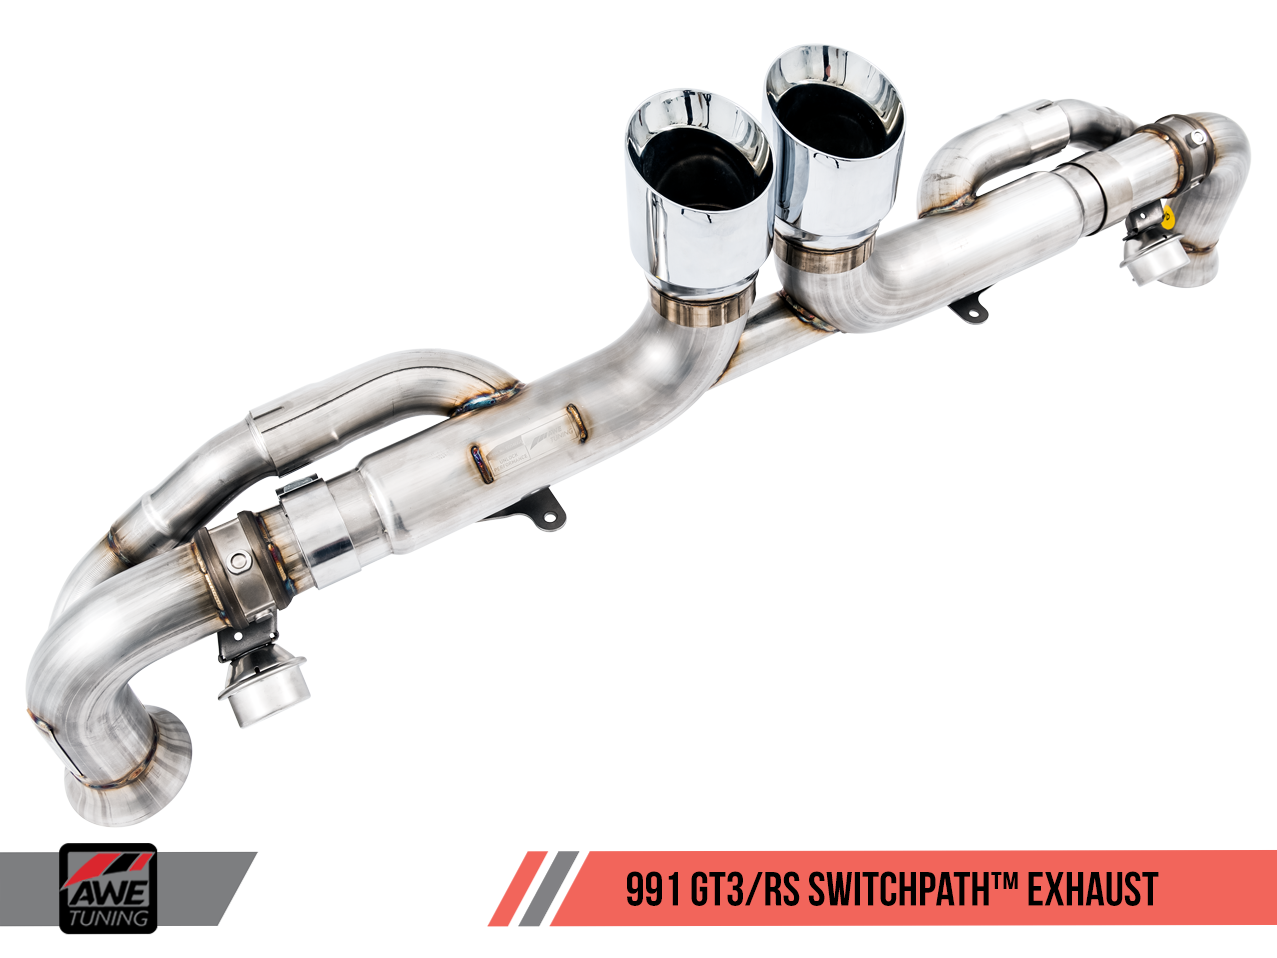 Engine - Exhaust - AWE SwitchPath Exhaust for Porsche 991.1 / 991.2 GT3 / RS - Diamond Black Tips - Used - 2010 to 2019 Porsche GT3 - La Jolla, CA 92037, United States